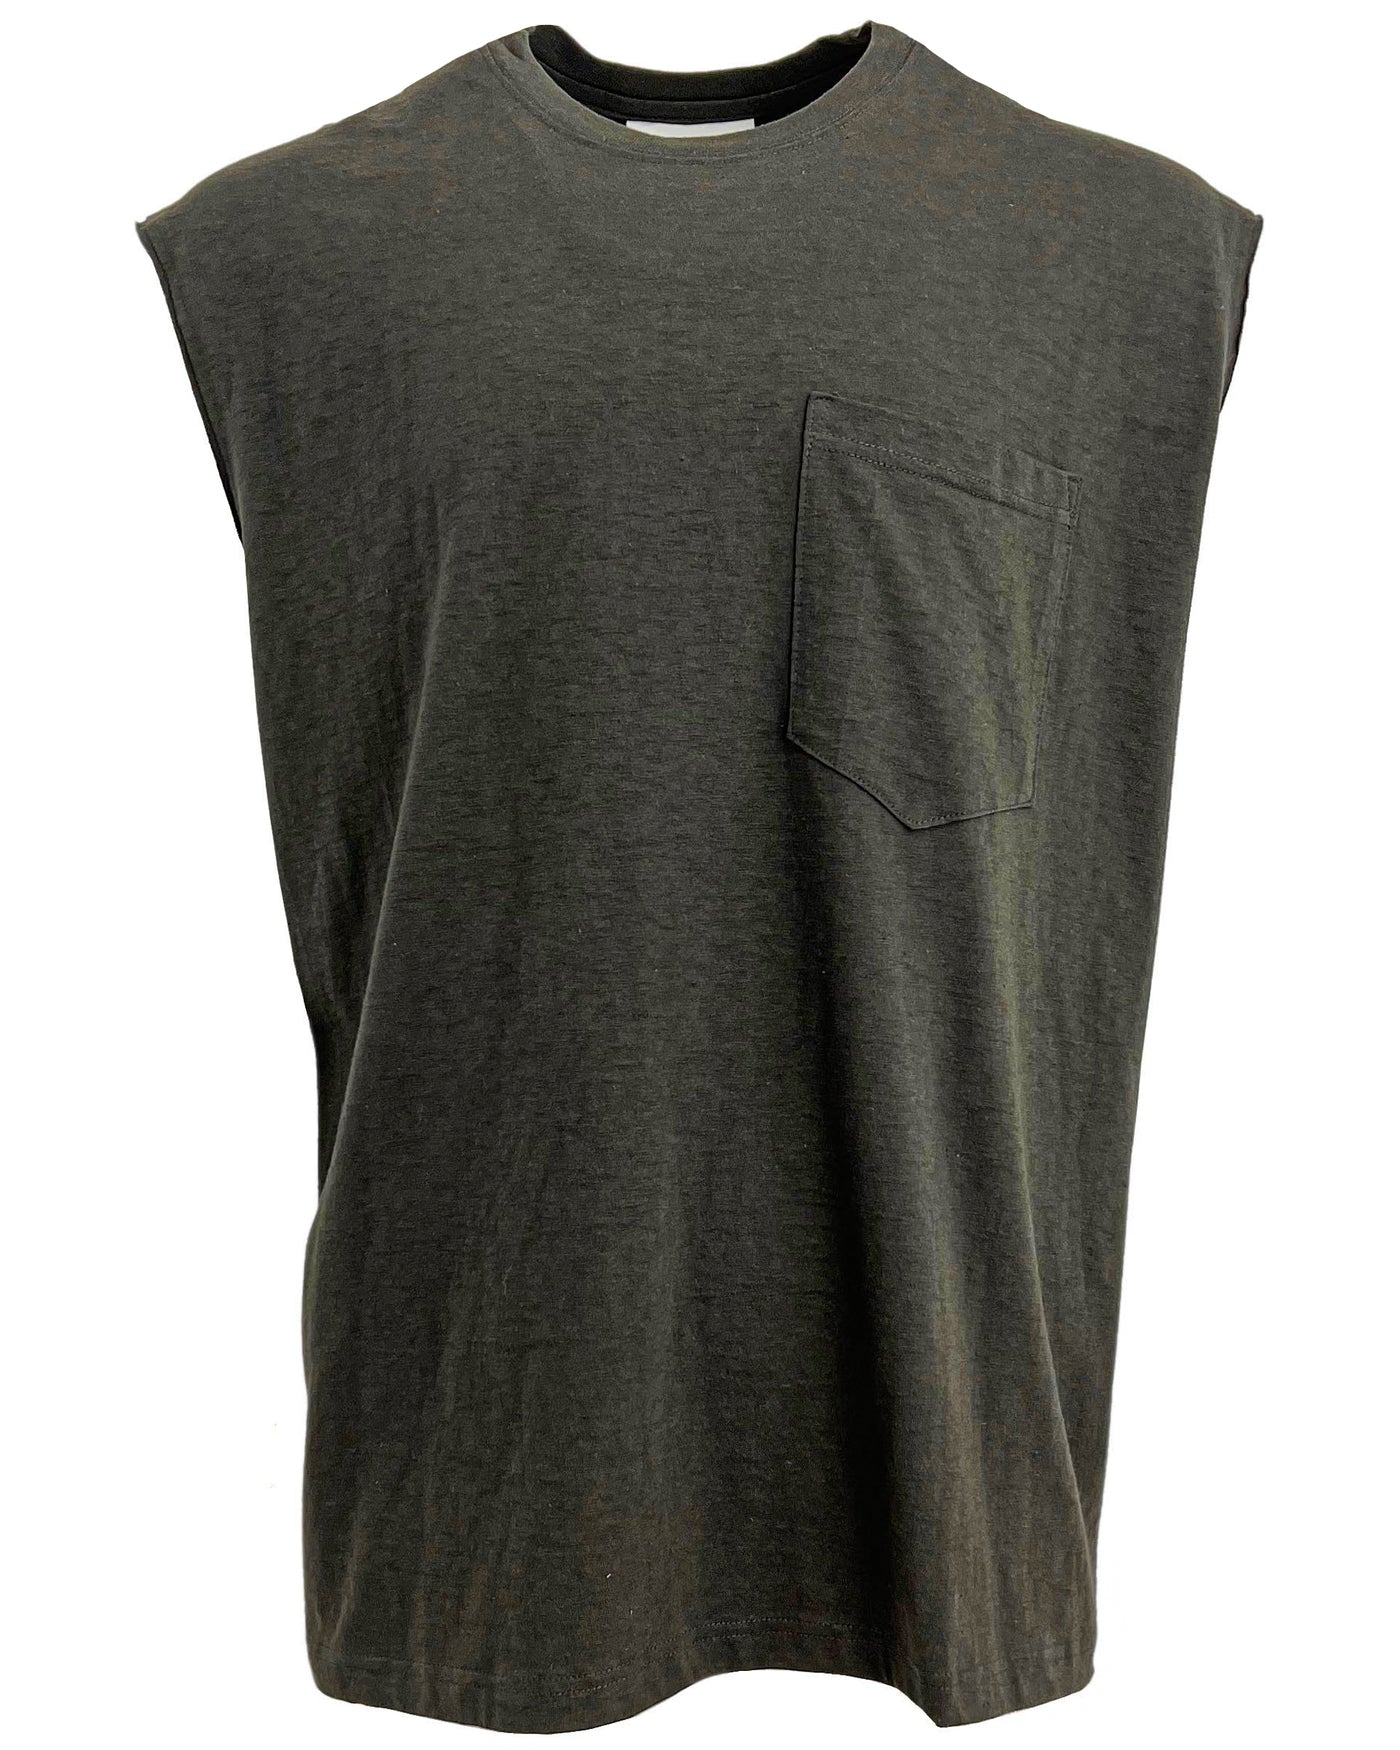 Song For The Mute Sleeveless Shirt in Root Brown - Discounts on Song For The Mute at UAL